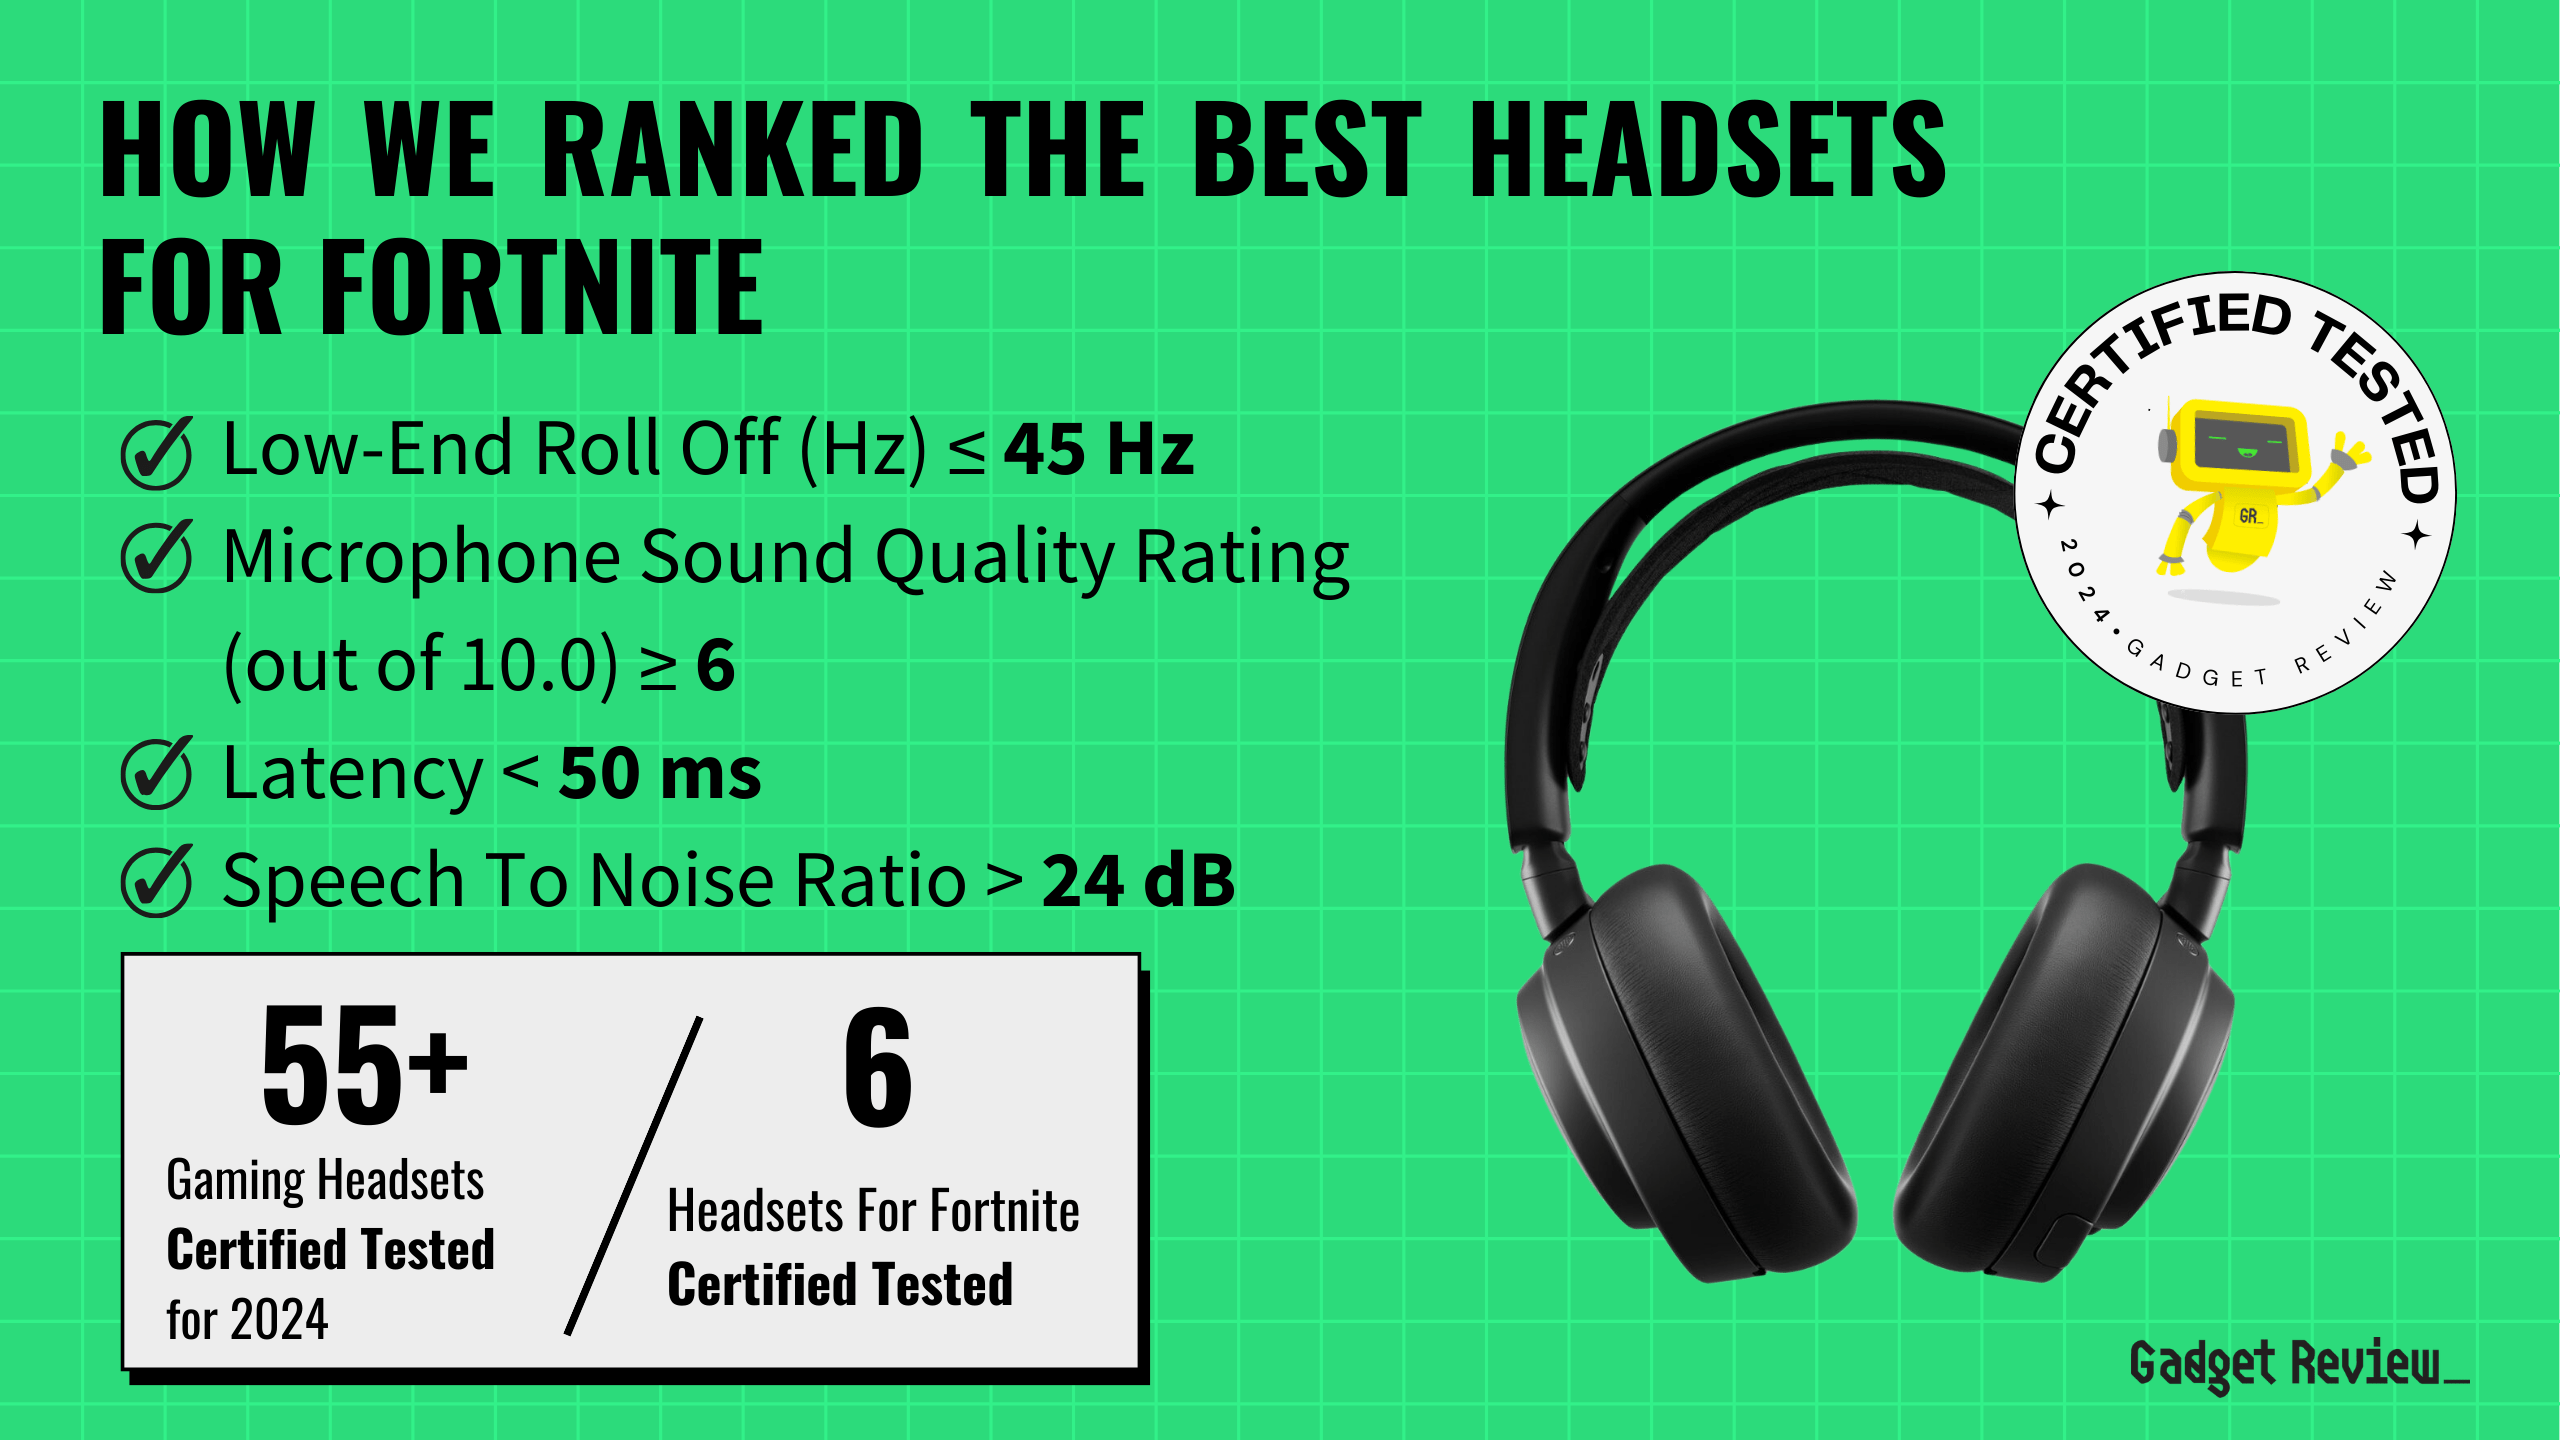 best headset for fortnite guide that shows the top best gaming headset model